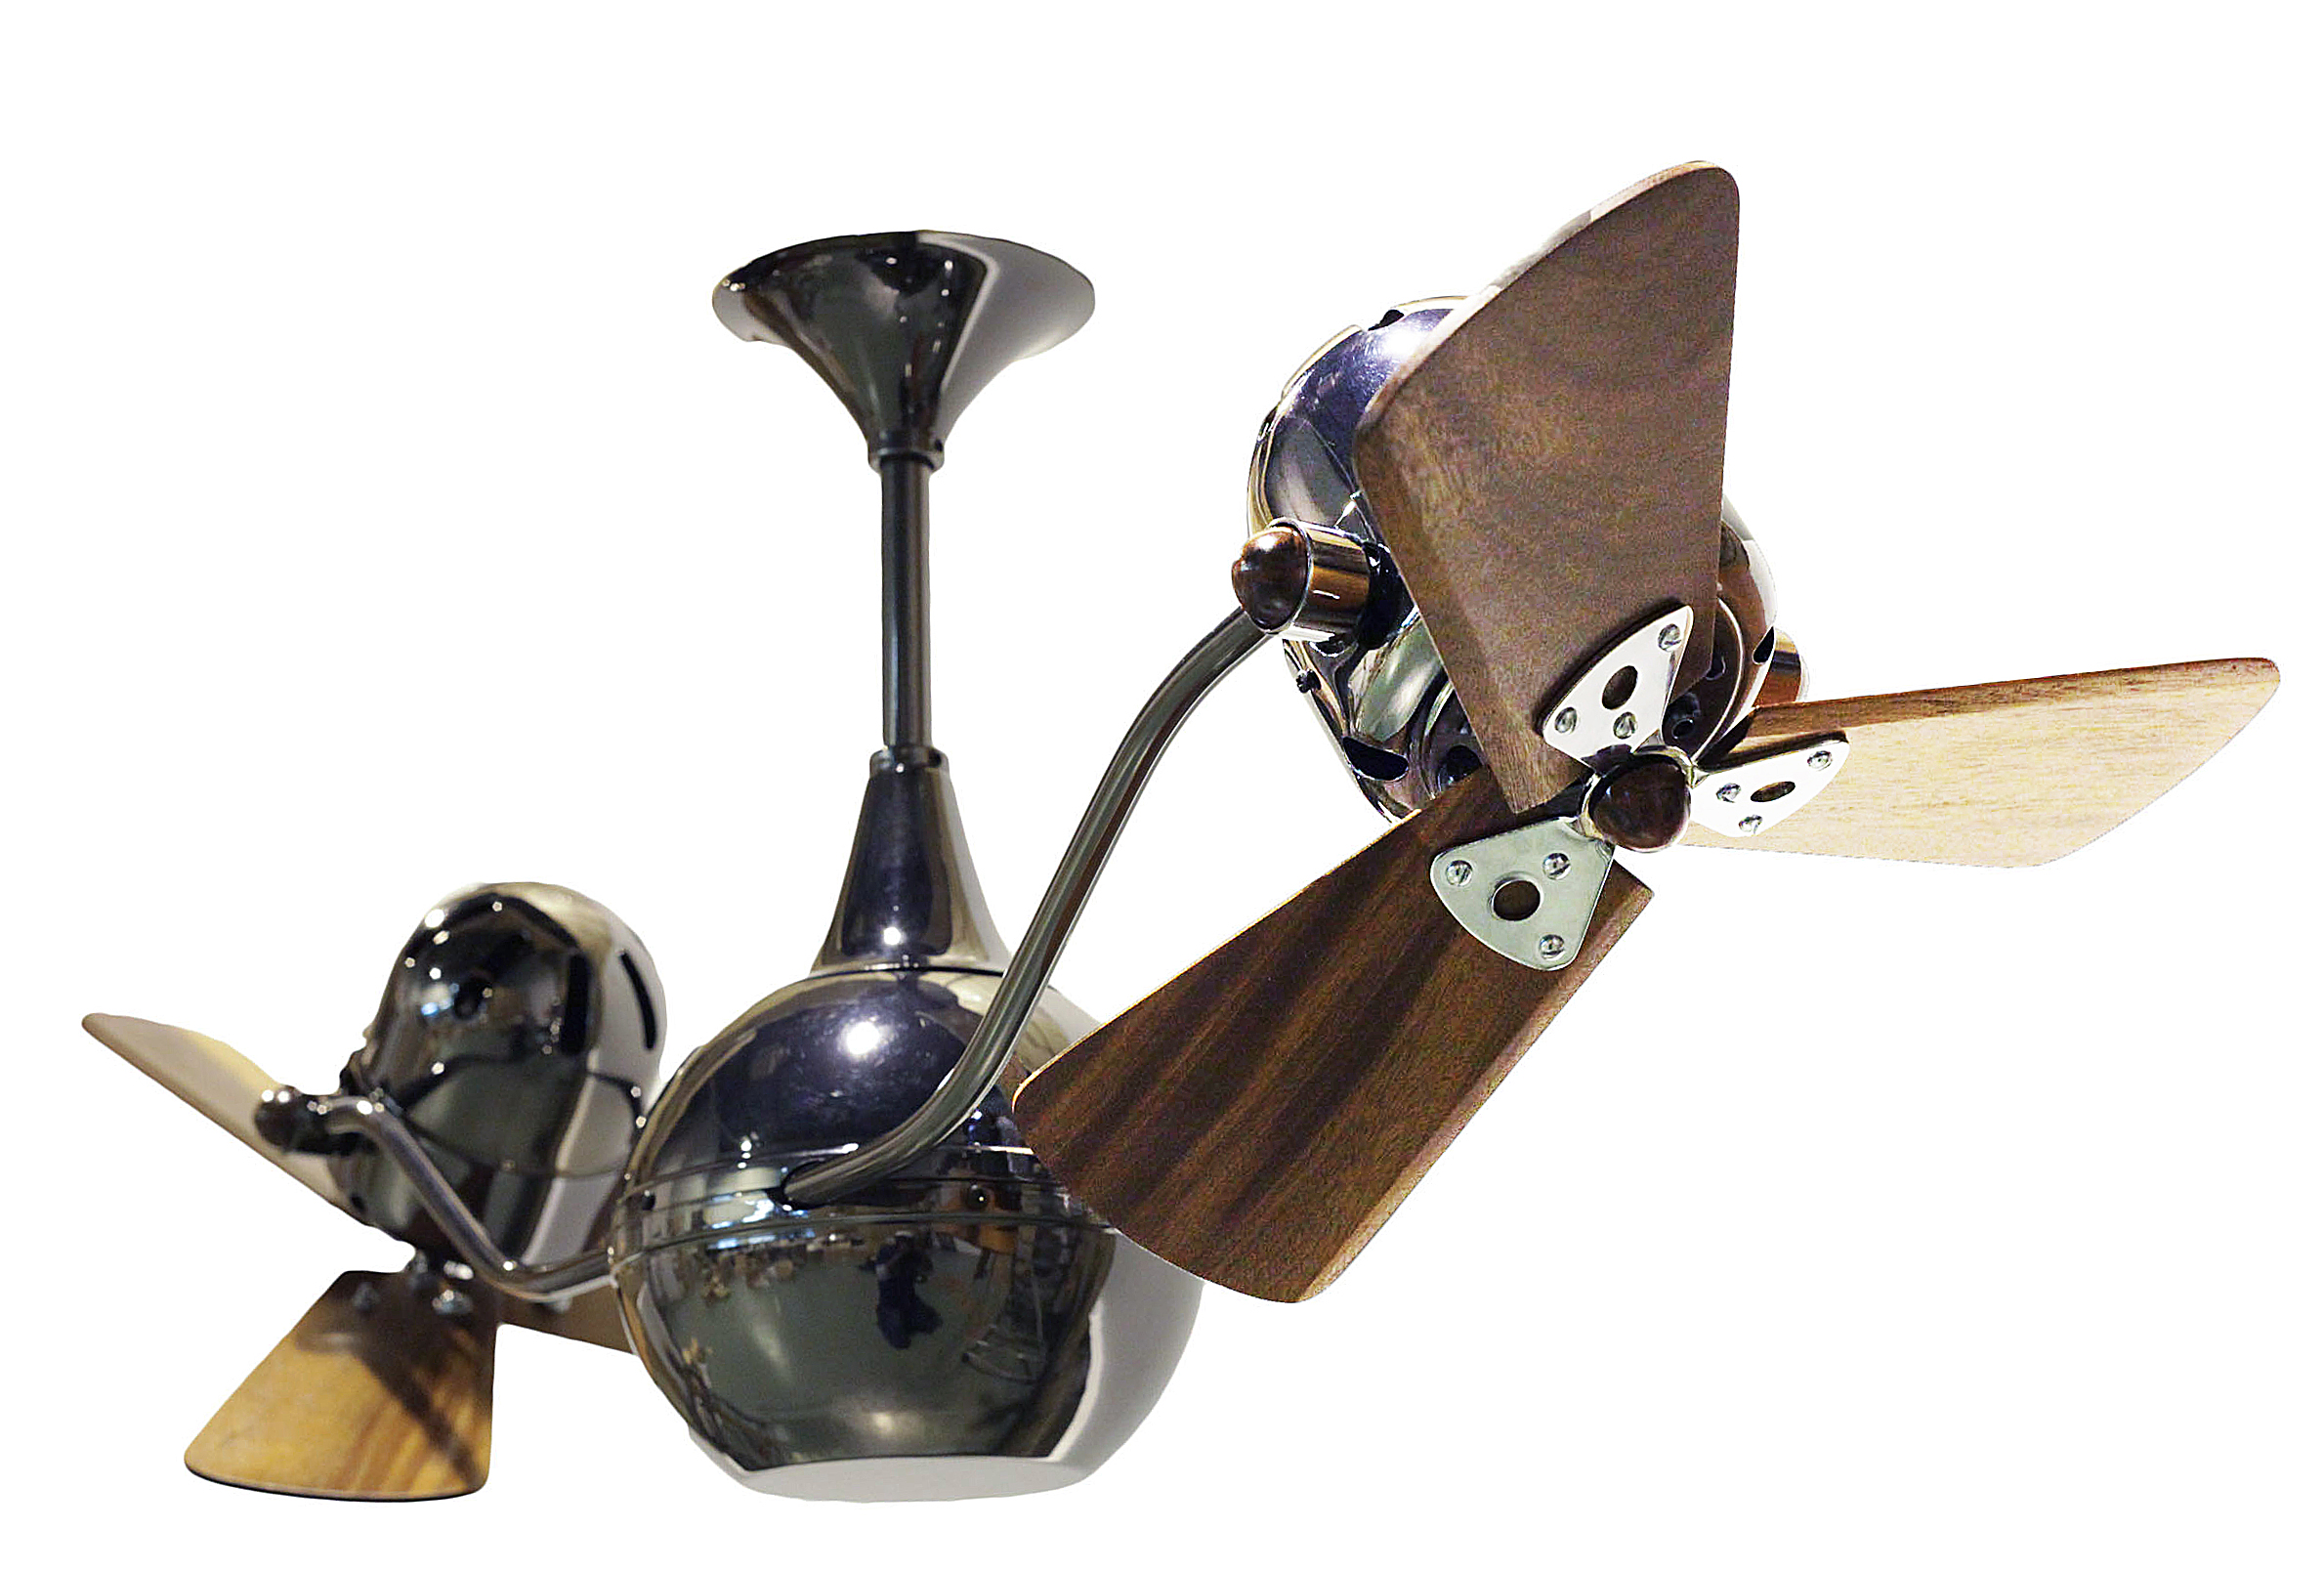 Vent-Bettina Rotational Dual Head Ceiling Fan in Black Nickel Finish with Mahogany Wood Blades